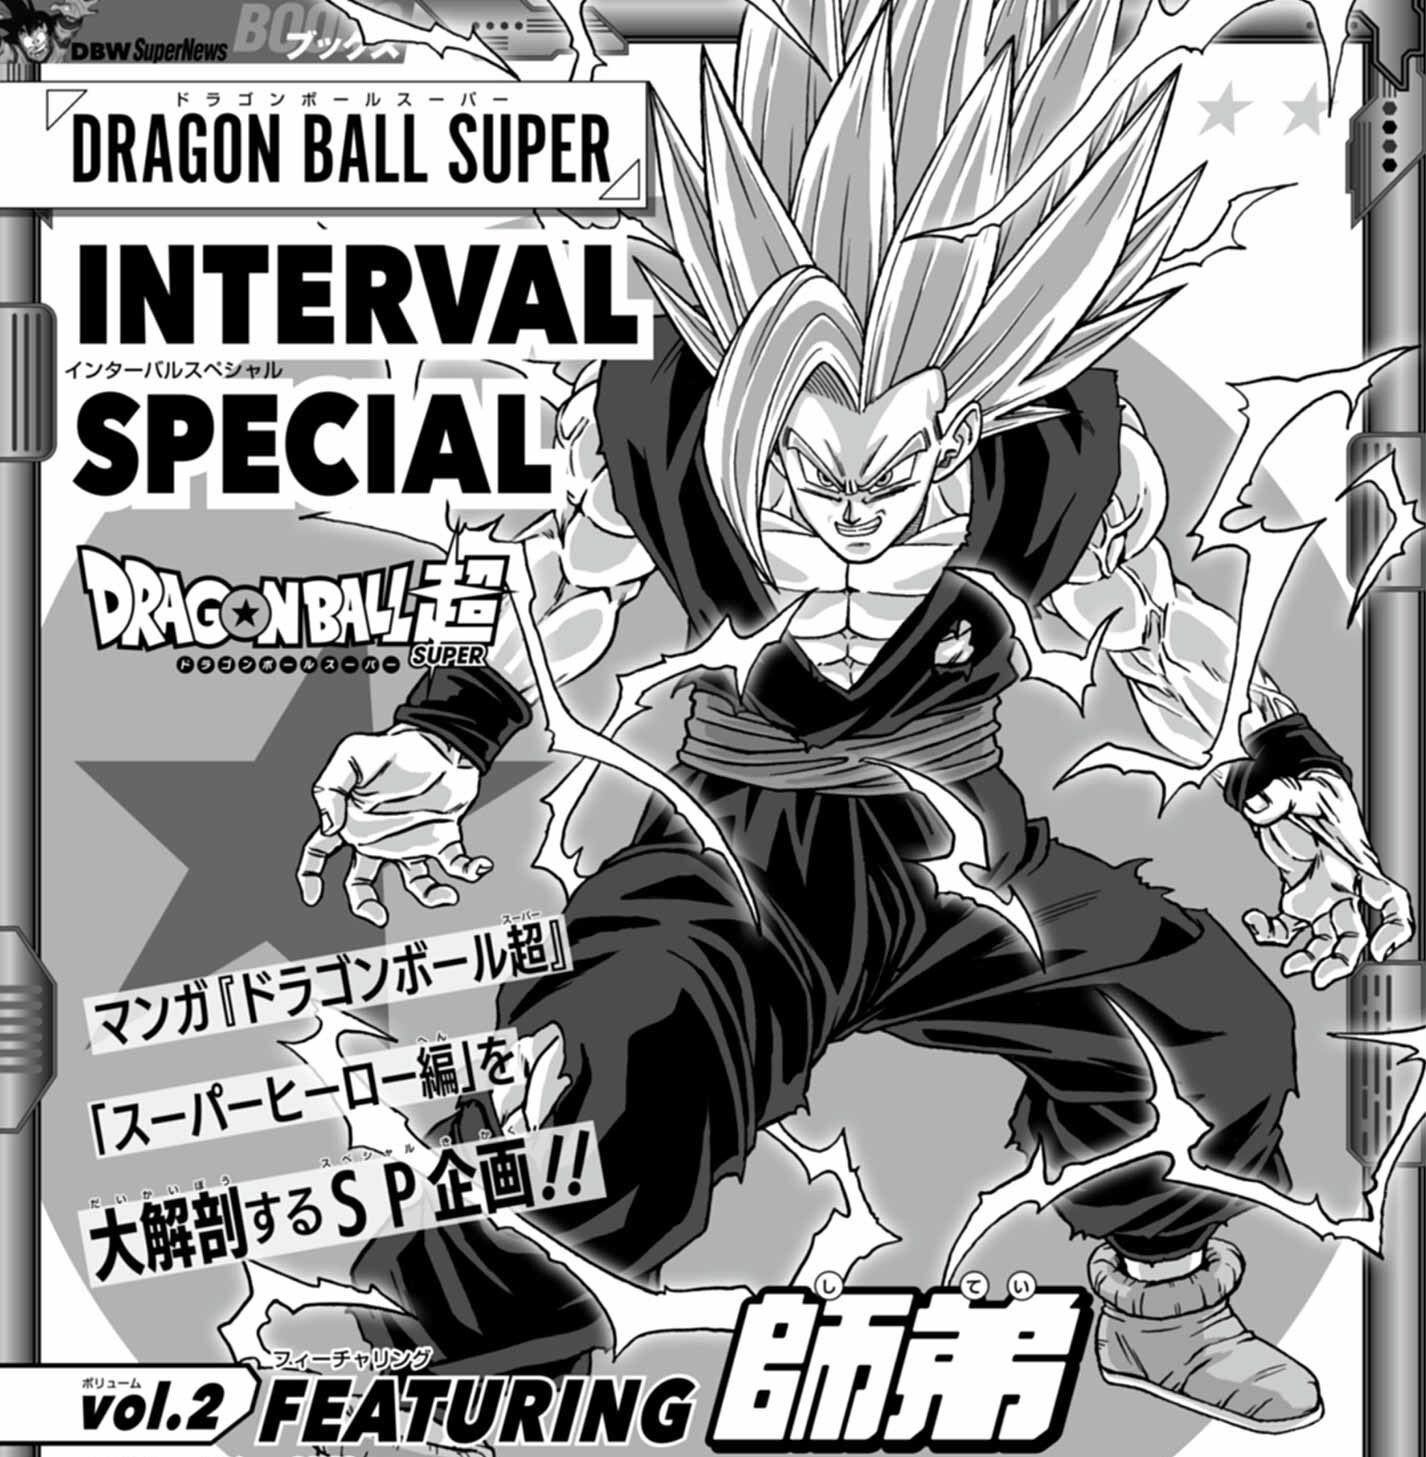 Adult Gohan in his new Beast form from the Dragon Ball Super manga